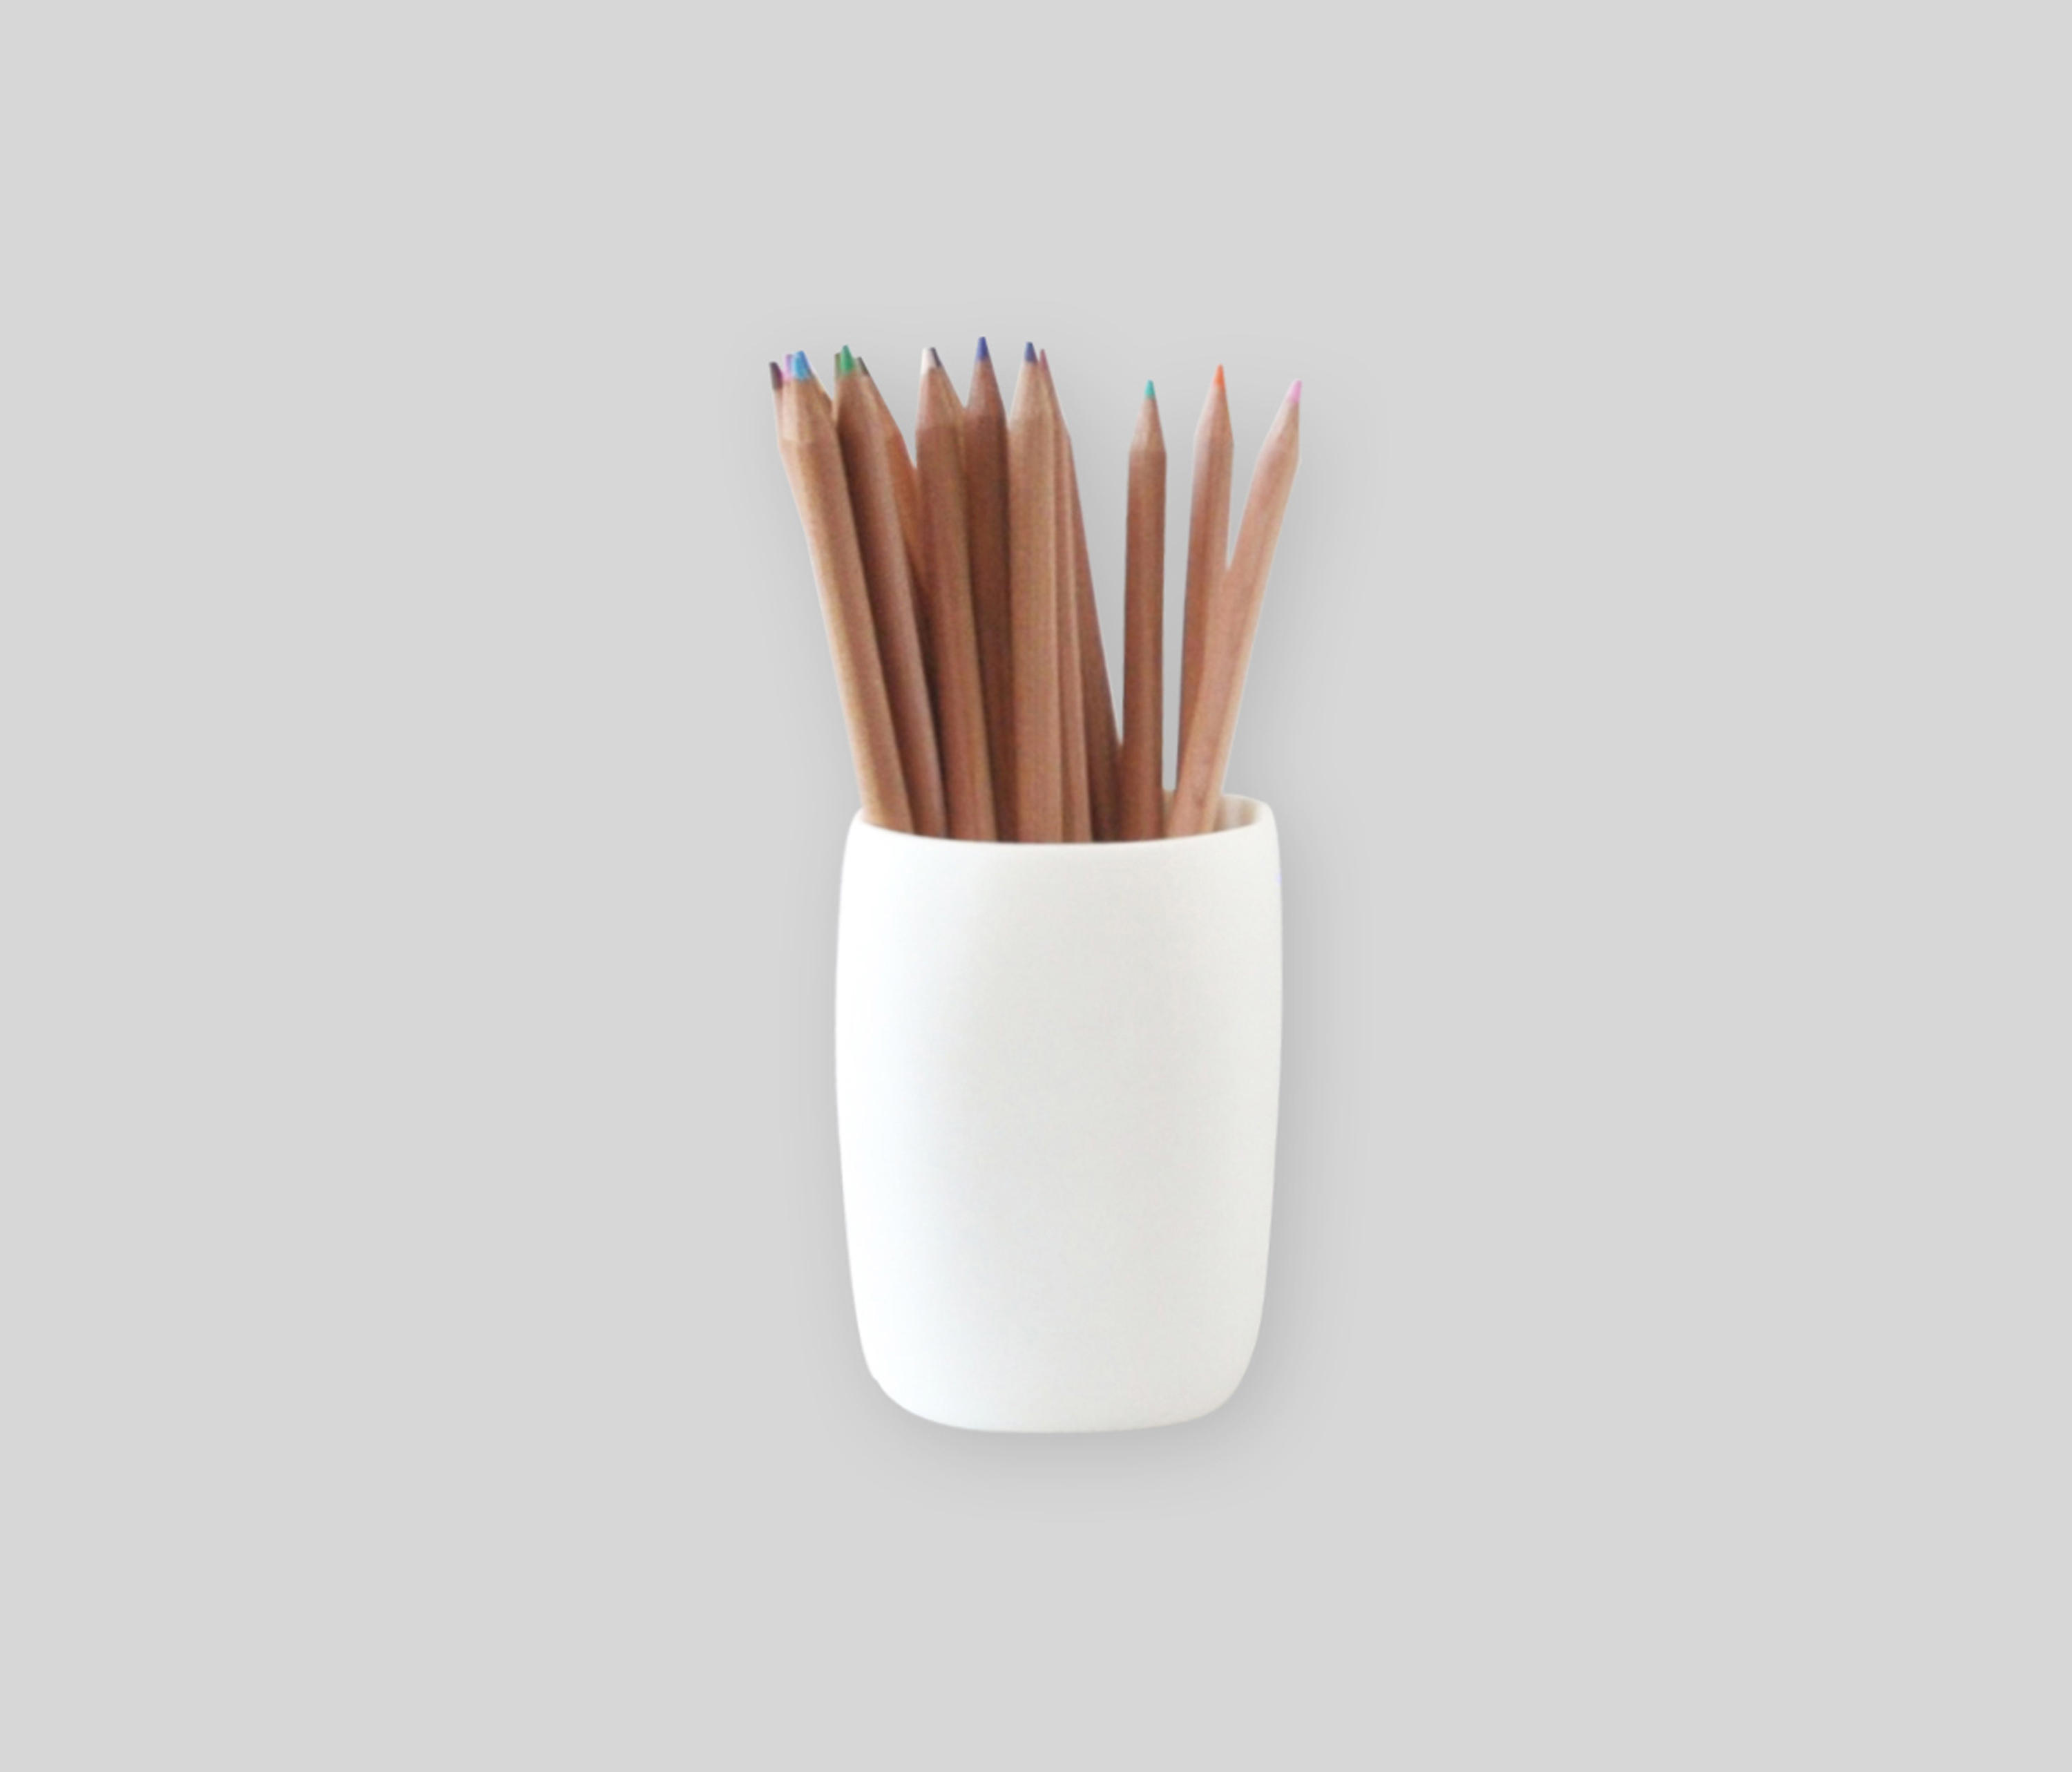 https://image.architonic.com/img_pro2-4/140/1245/workspace-pencil-cup-d-16-b.jpg